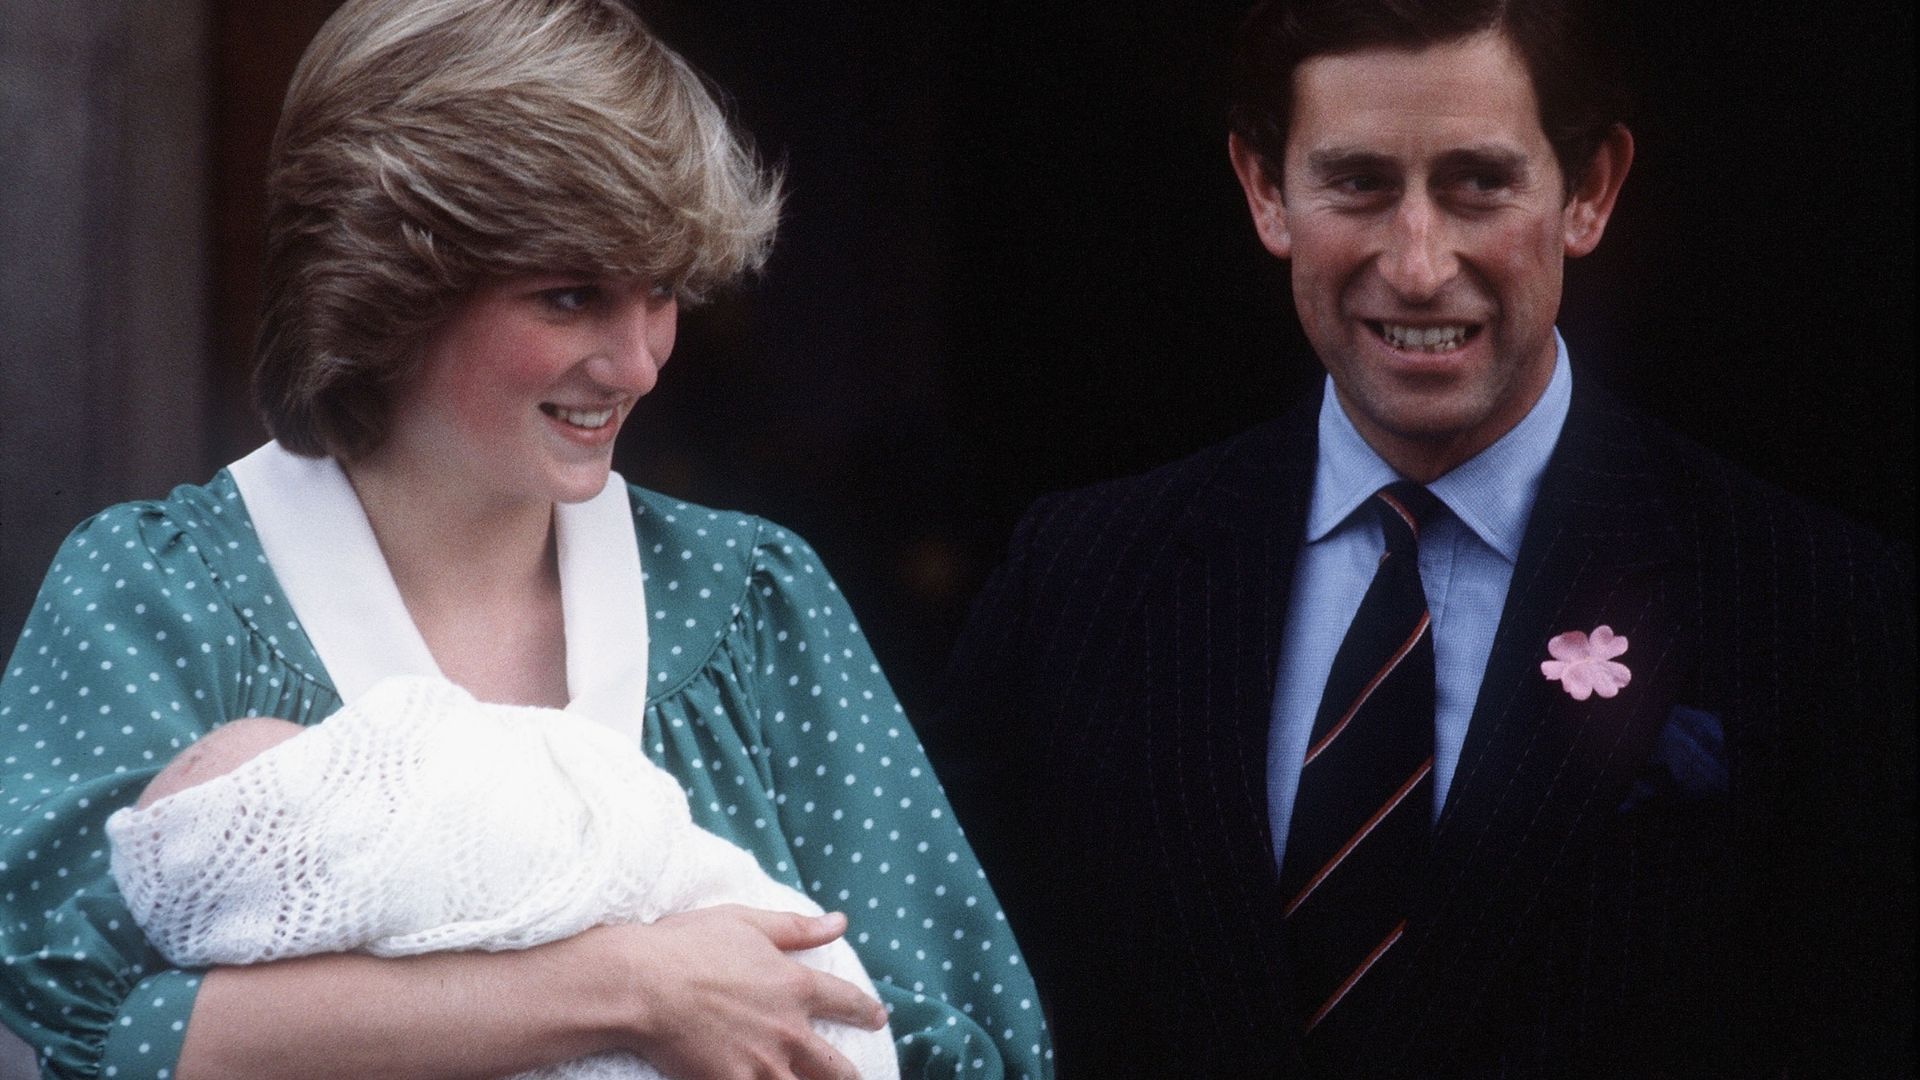 <p>                     Prince William was the first royal ever to be born at a hospital in 1982 as the royal procedure had always been for the mother to have the baby at home. However, in true Diana style, she refused to do that. Instead, she had him at St. Mary's Hospital and introduced him to the world on the front steps.                   </p>